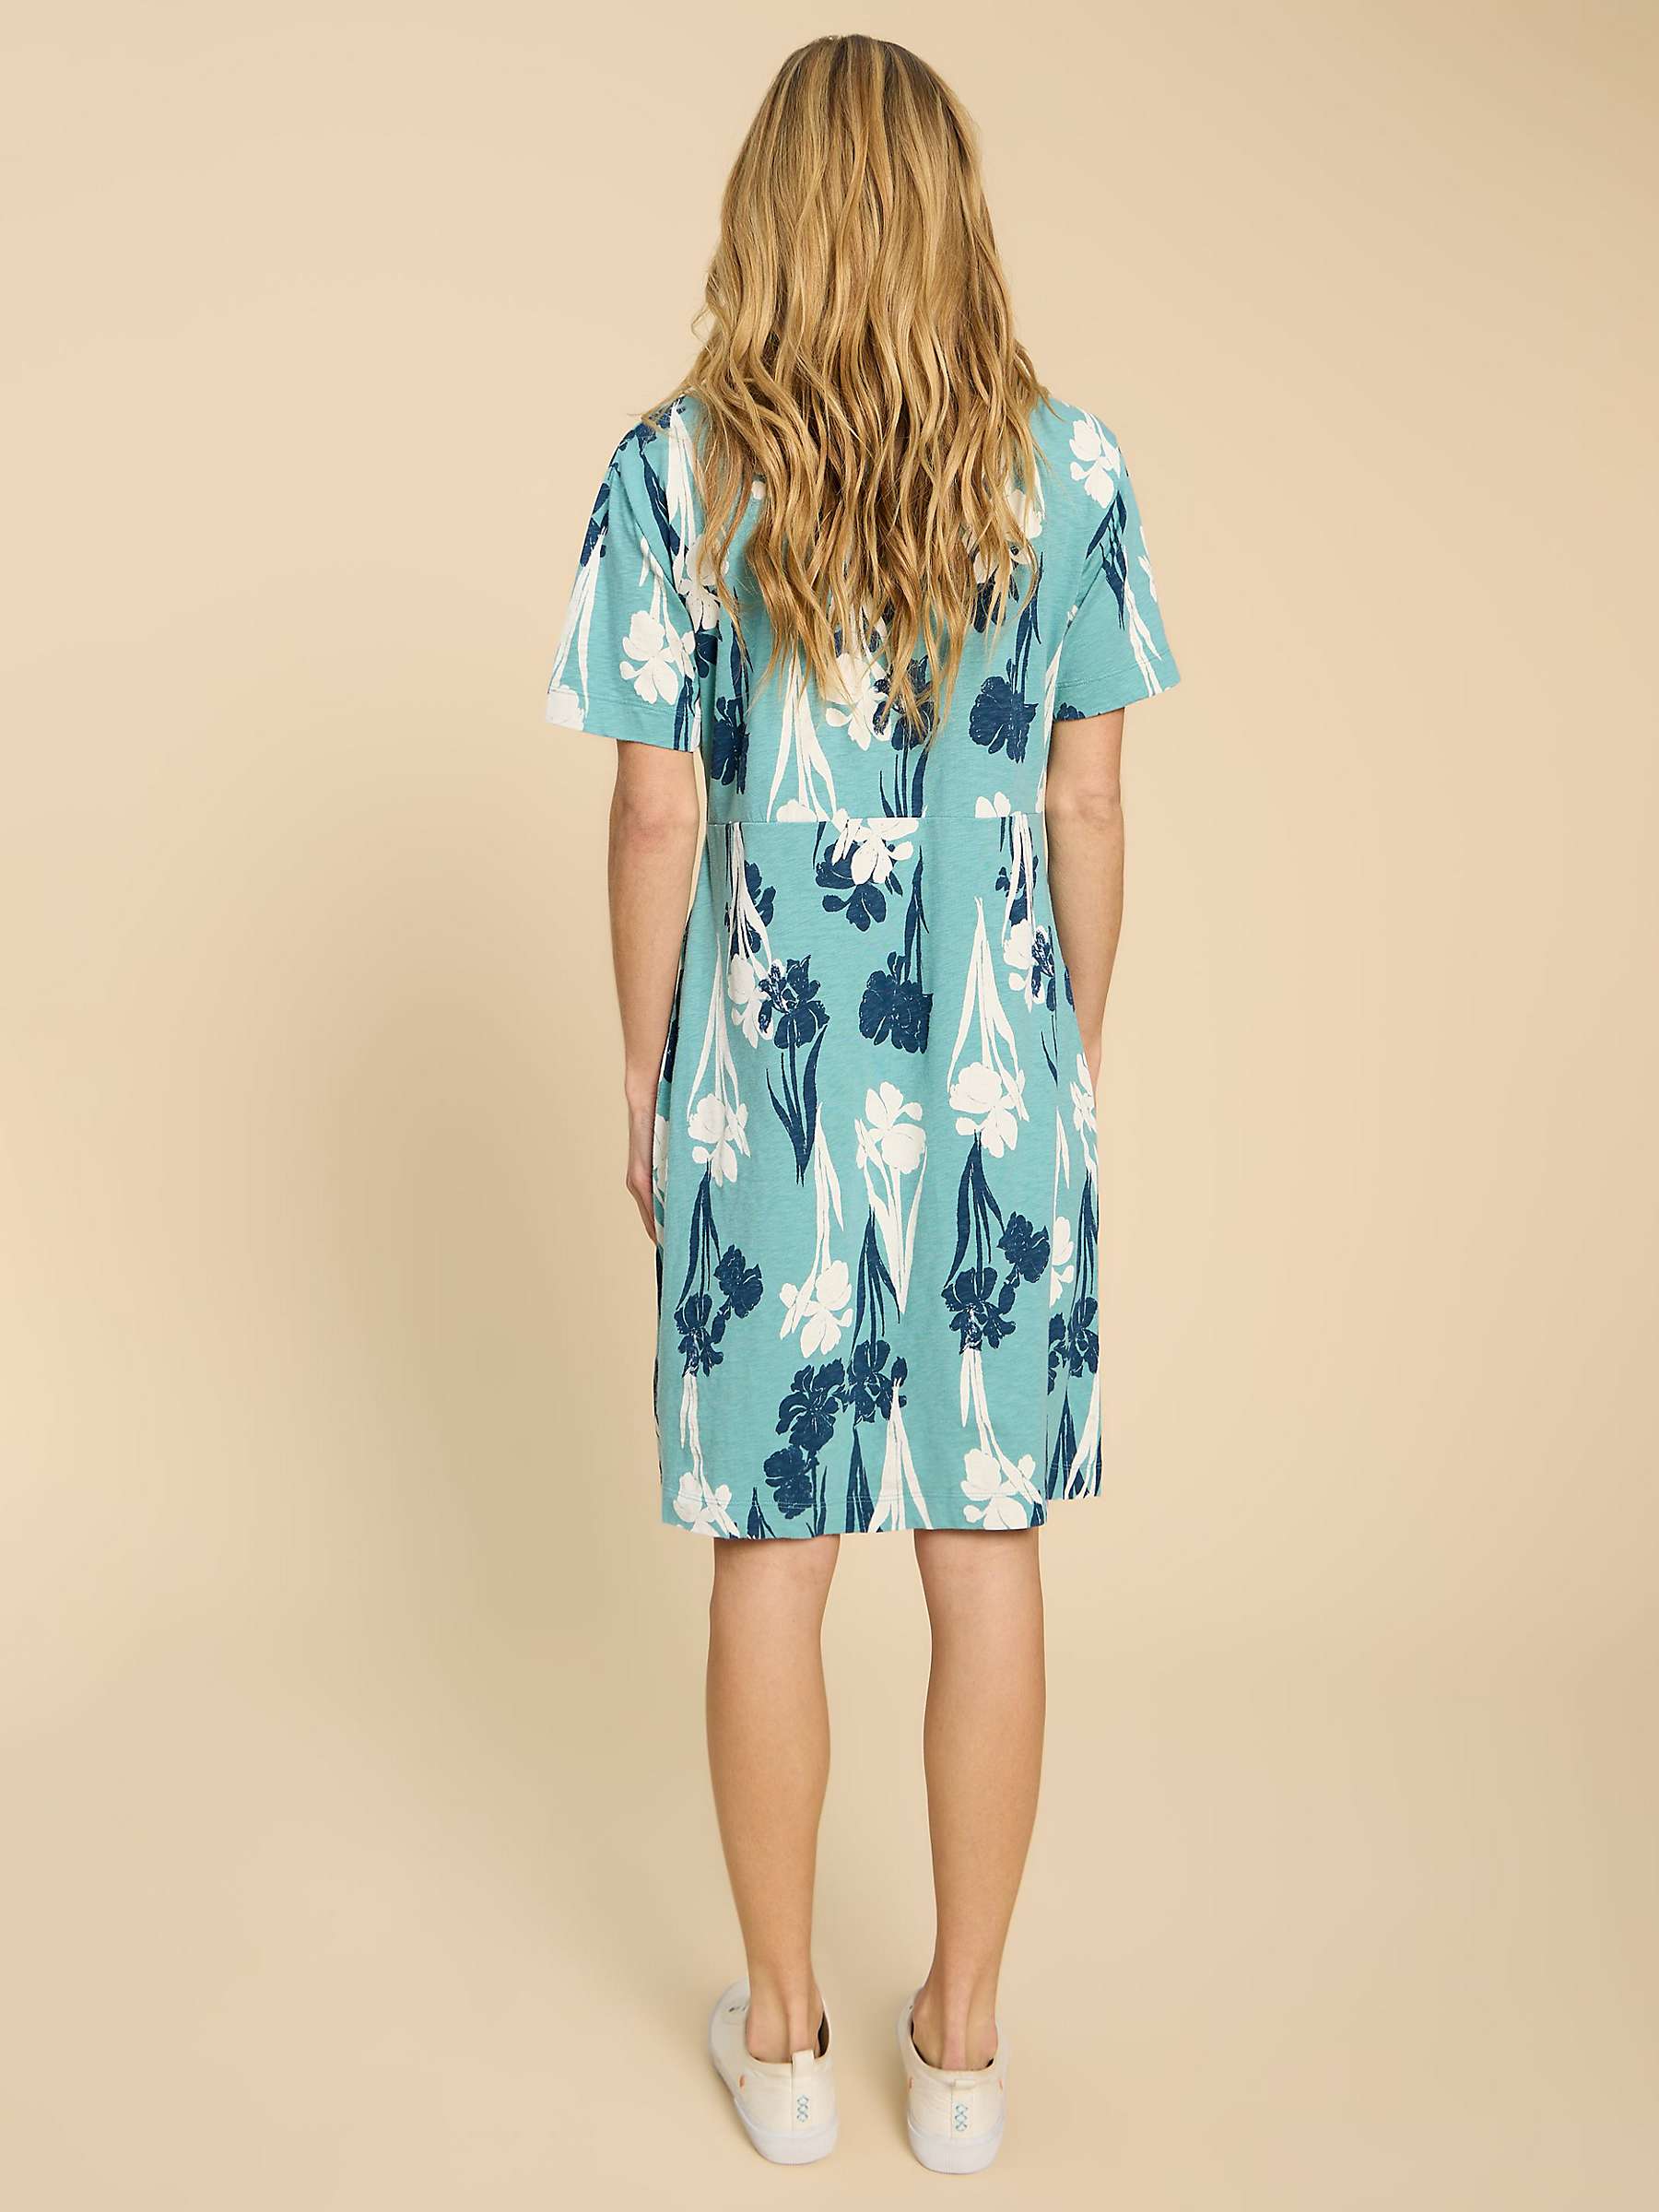 Buy White Stuff Tammy Cotton Jersey Dress, Teal Online at johnlewis.com